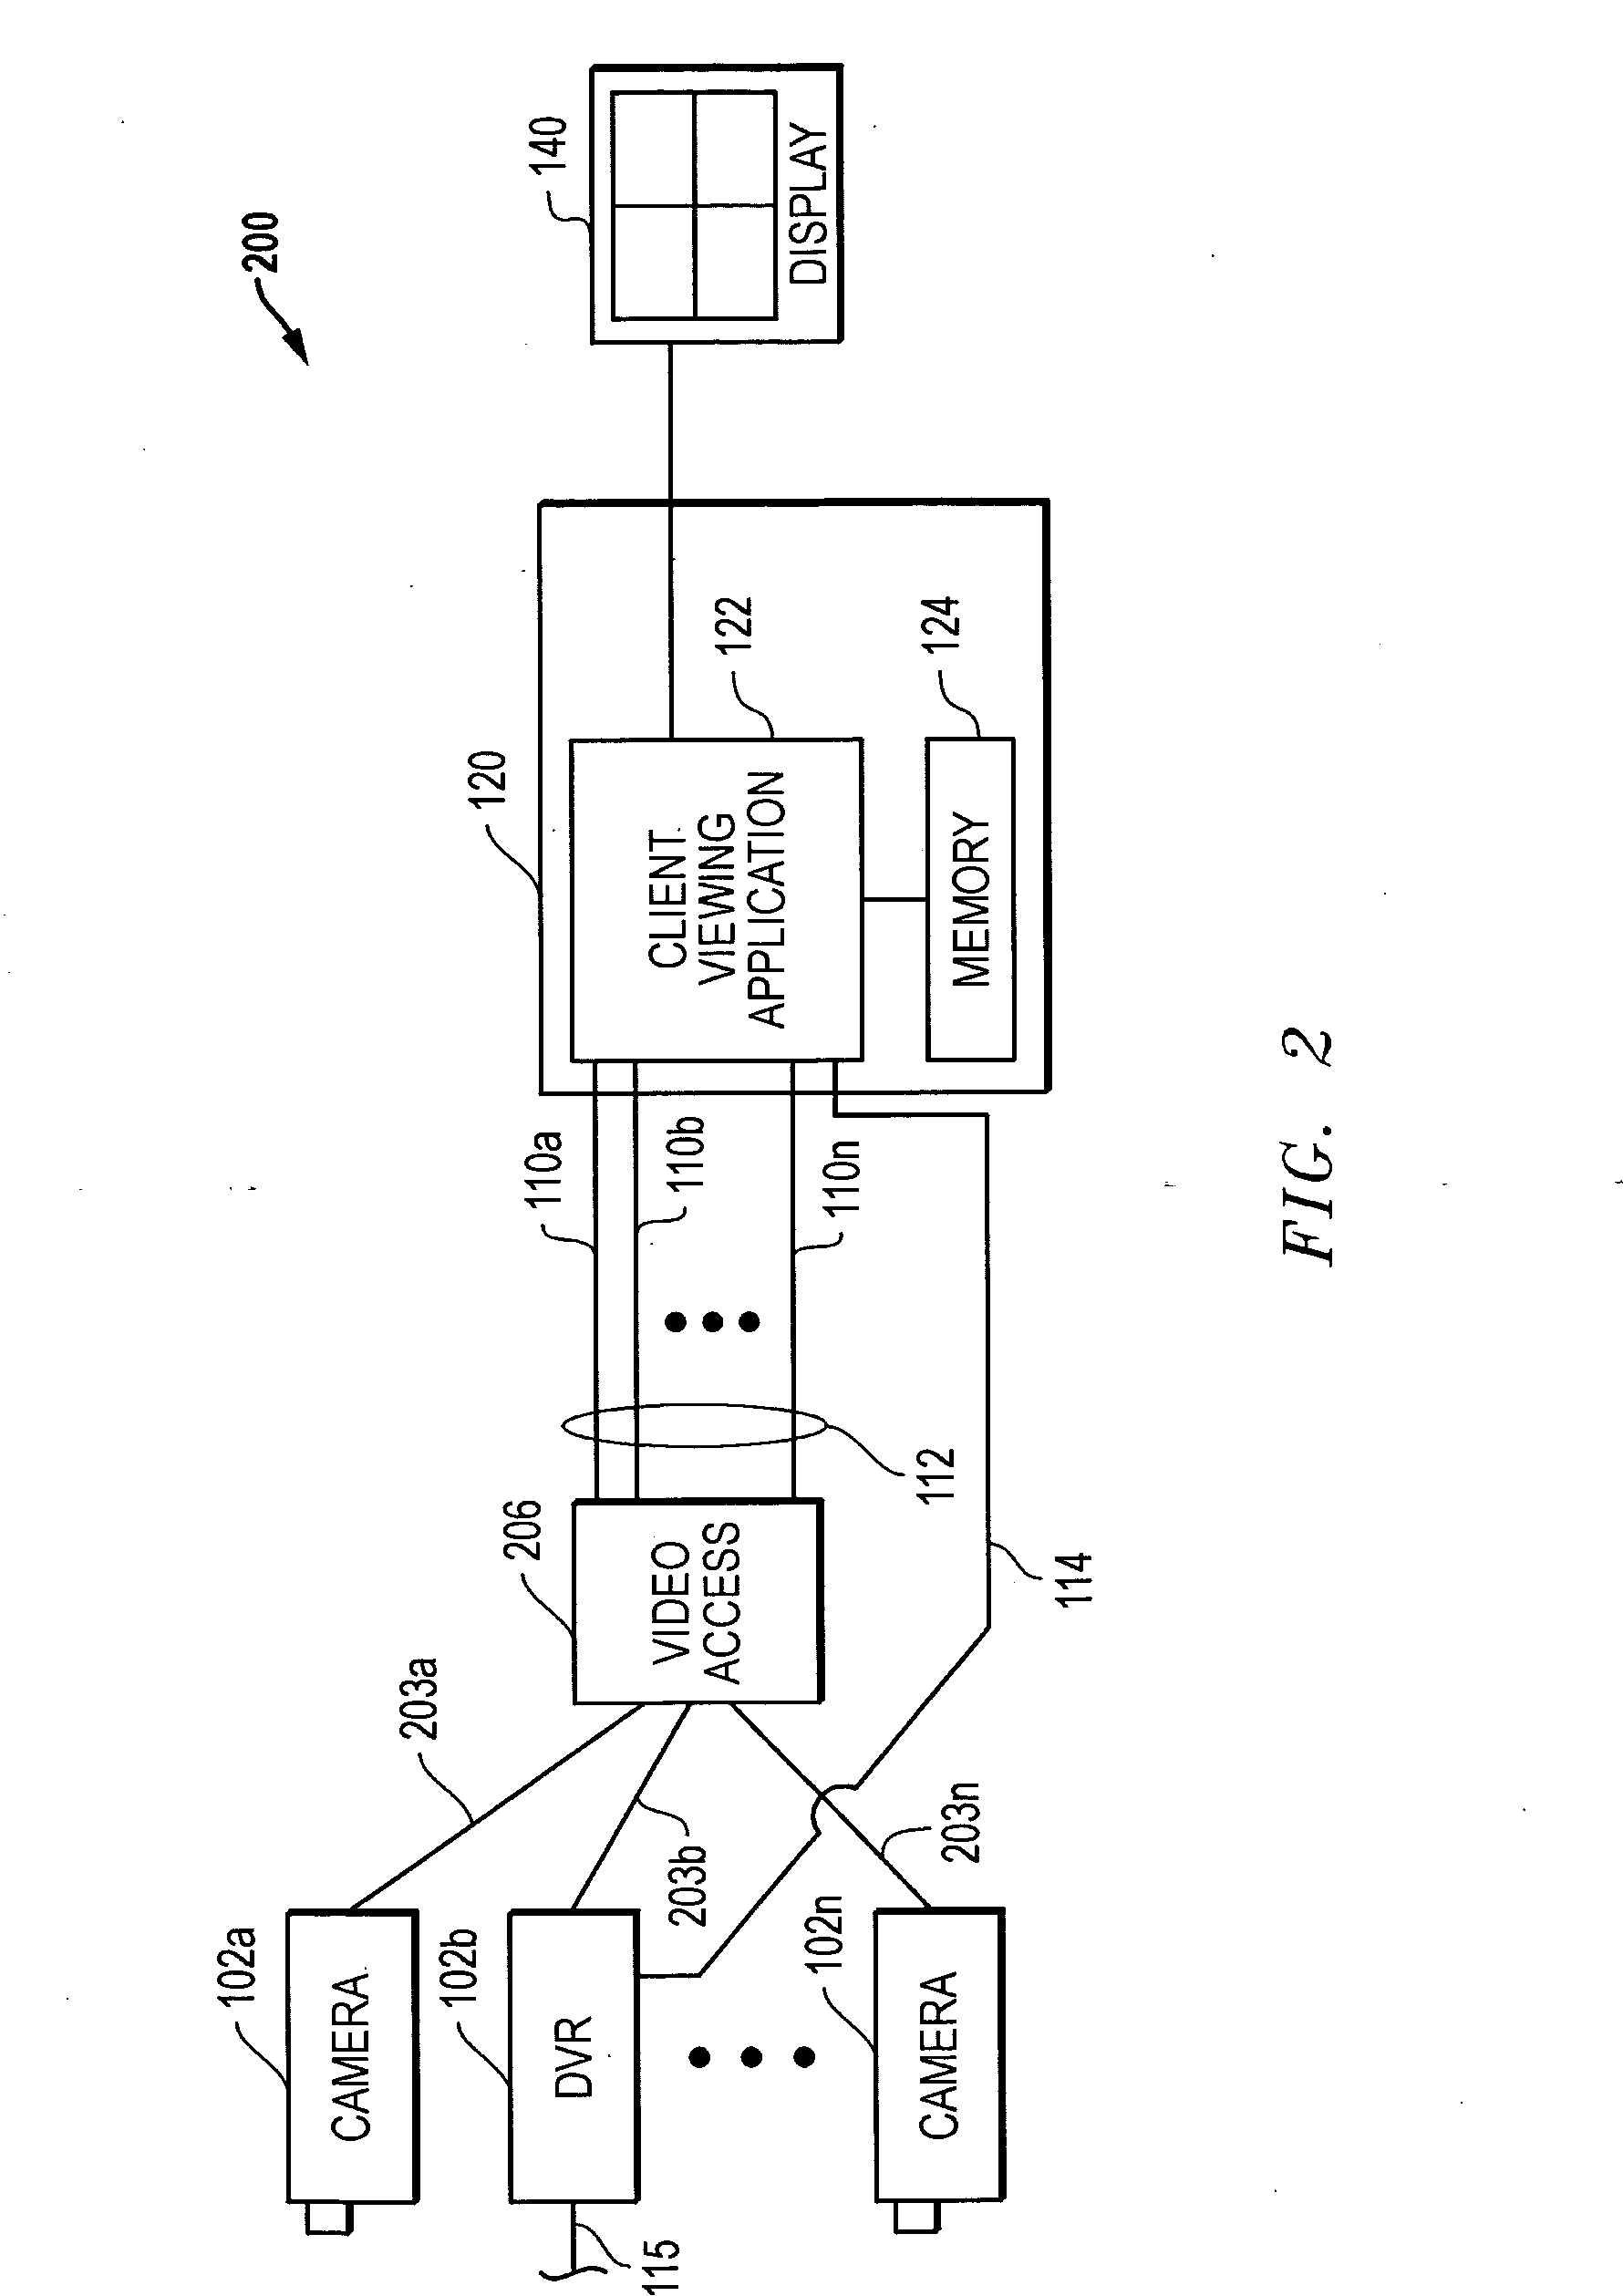 Systems and methods for video stream selection